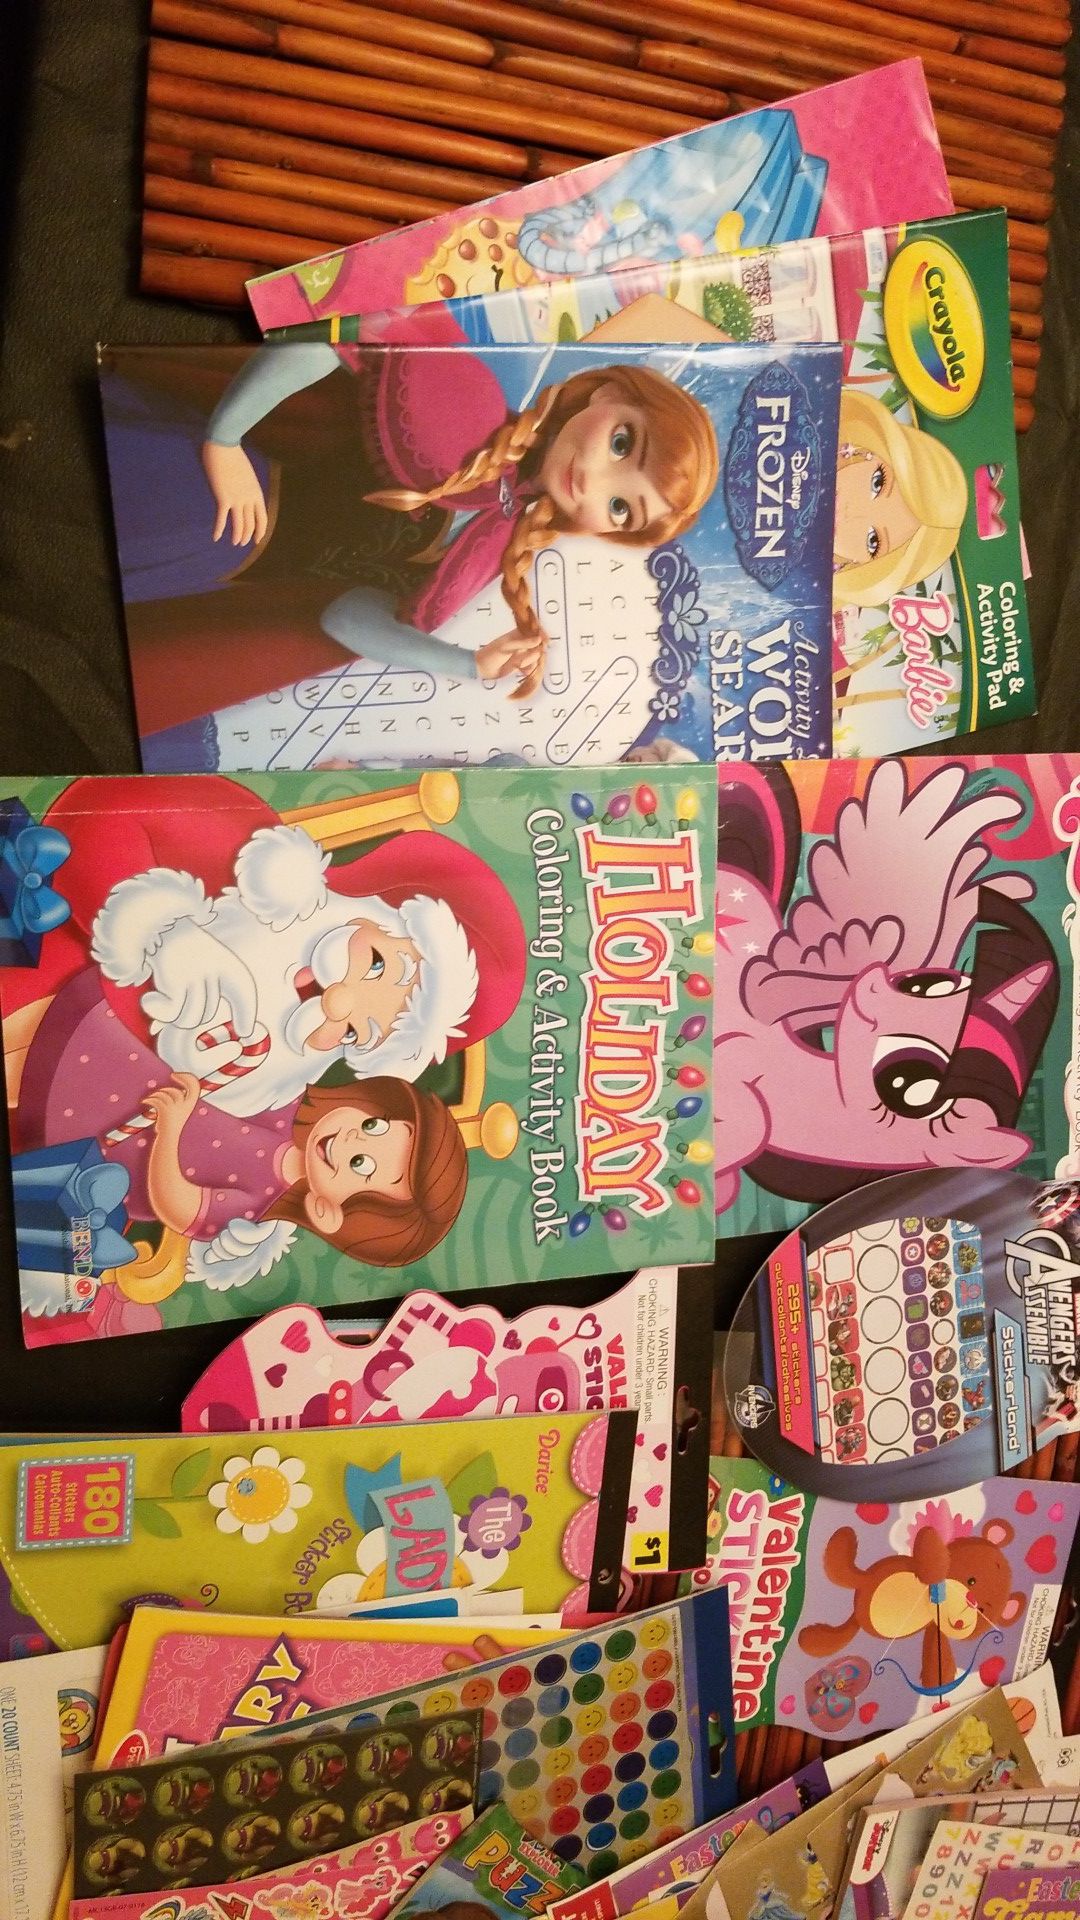 Pending pickup...Activity books, color books, and lots of stickers